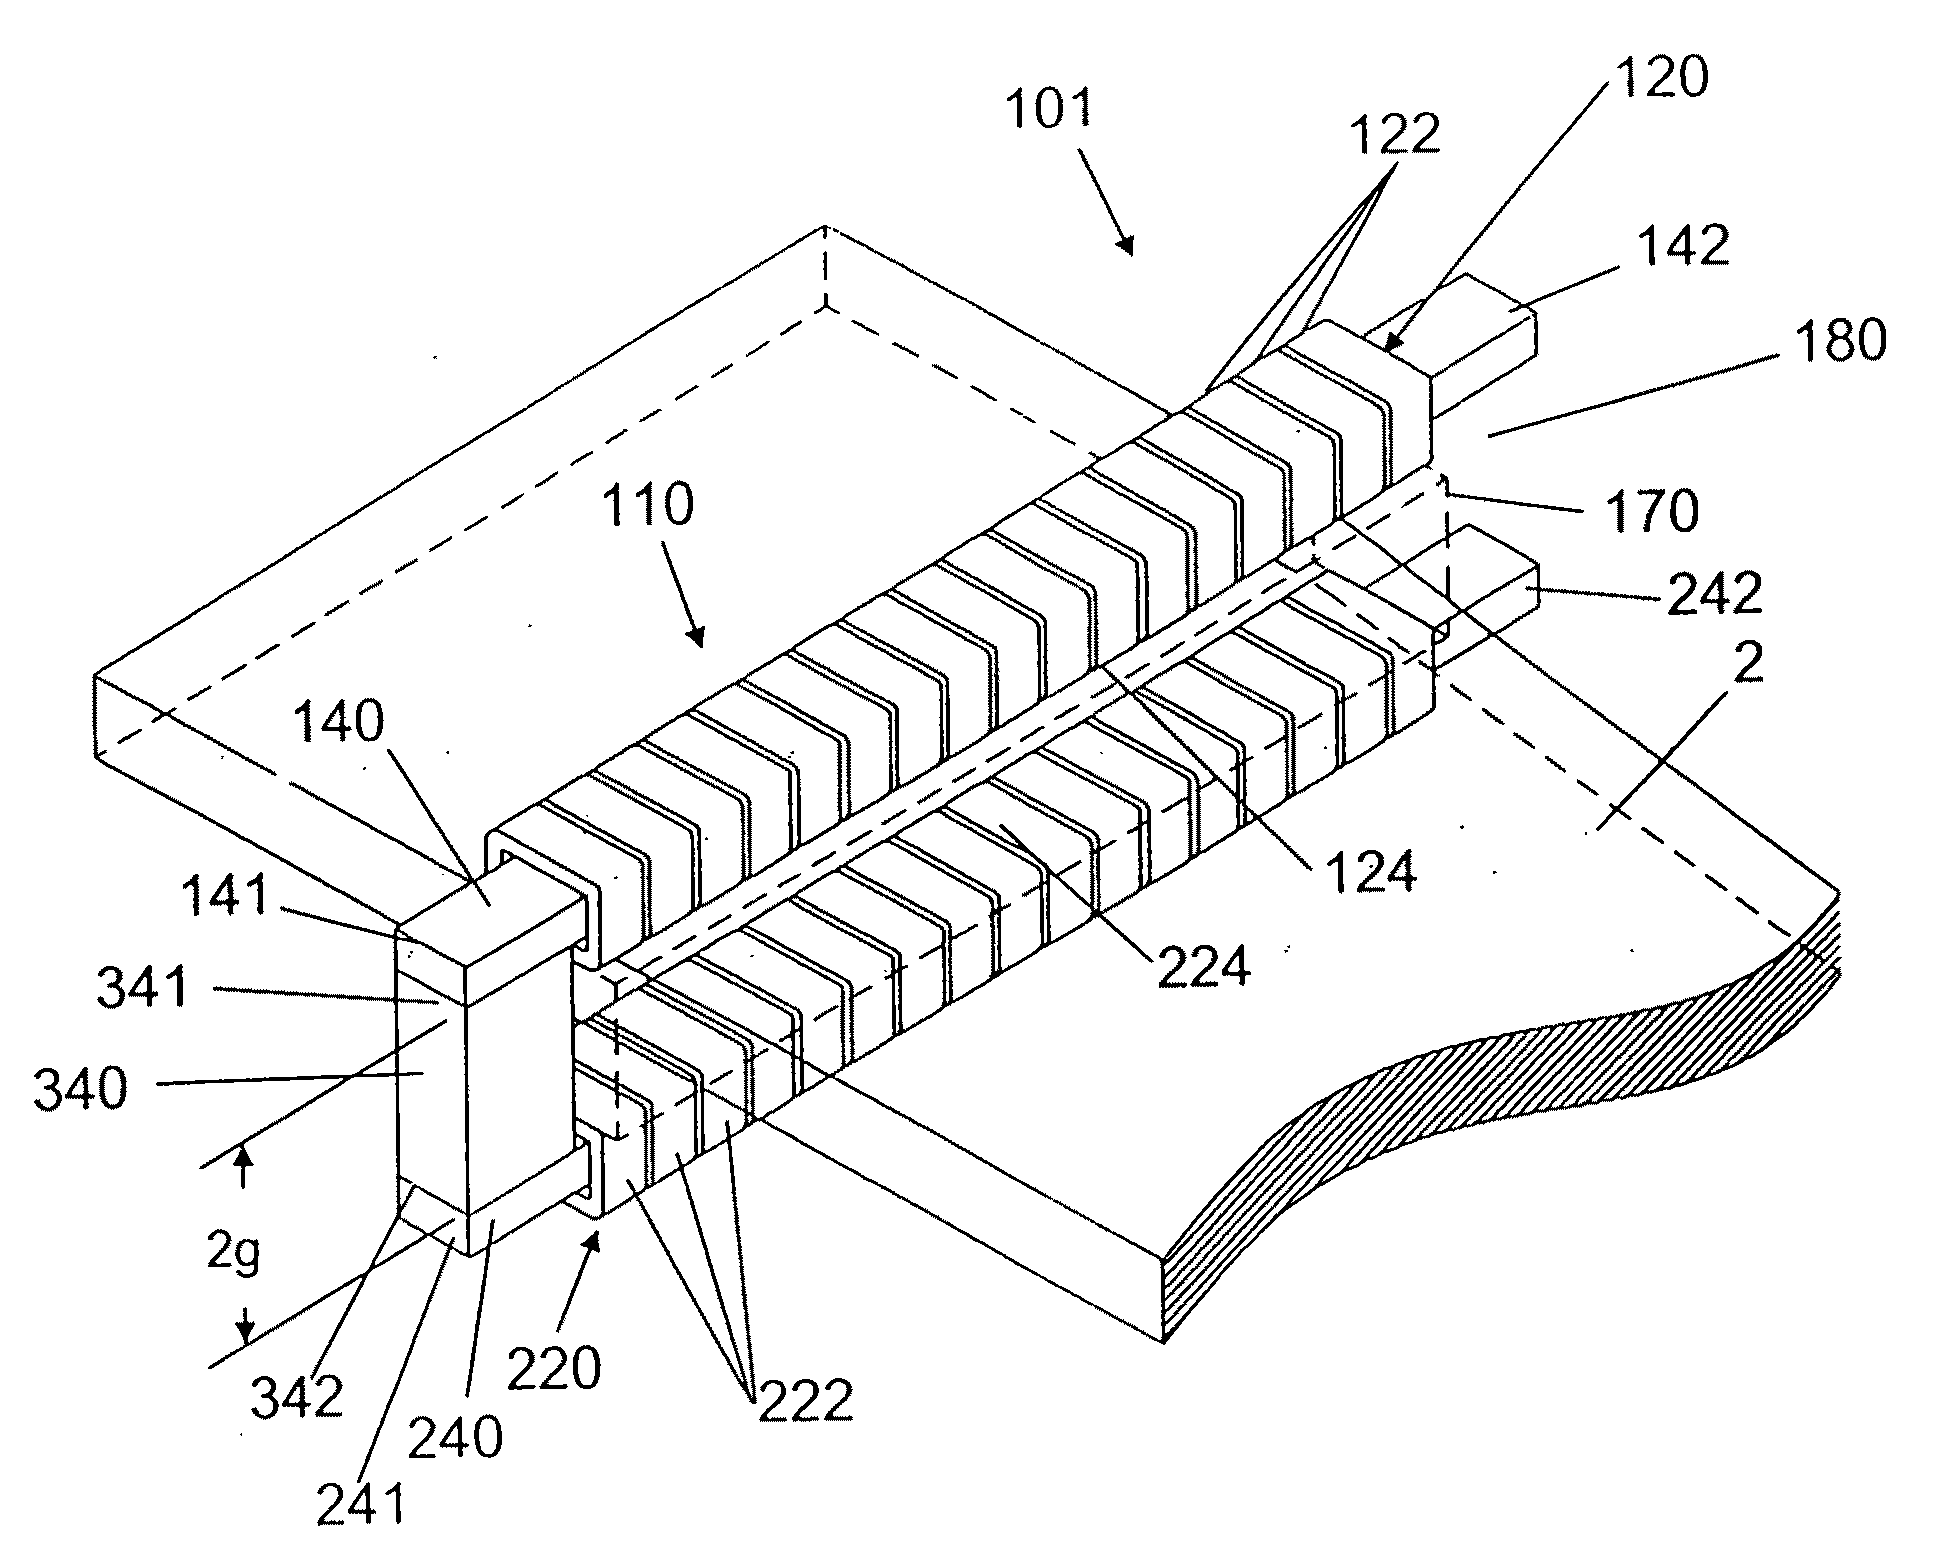 Open-ended electromagnetic corrector assembly and method for deflecting, focusing, and controlling the uniformity of a traveling ion beam